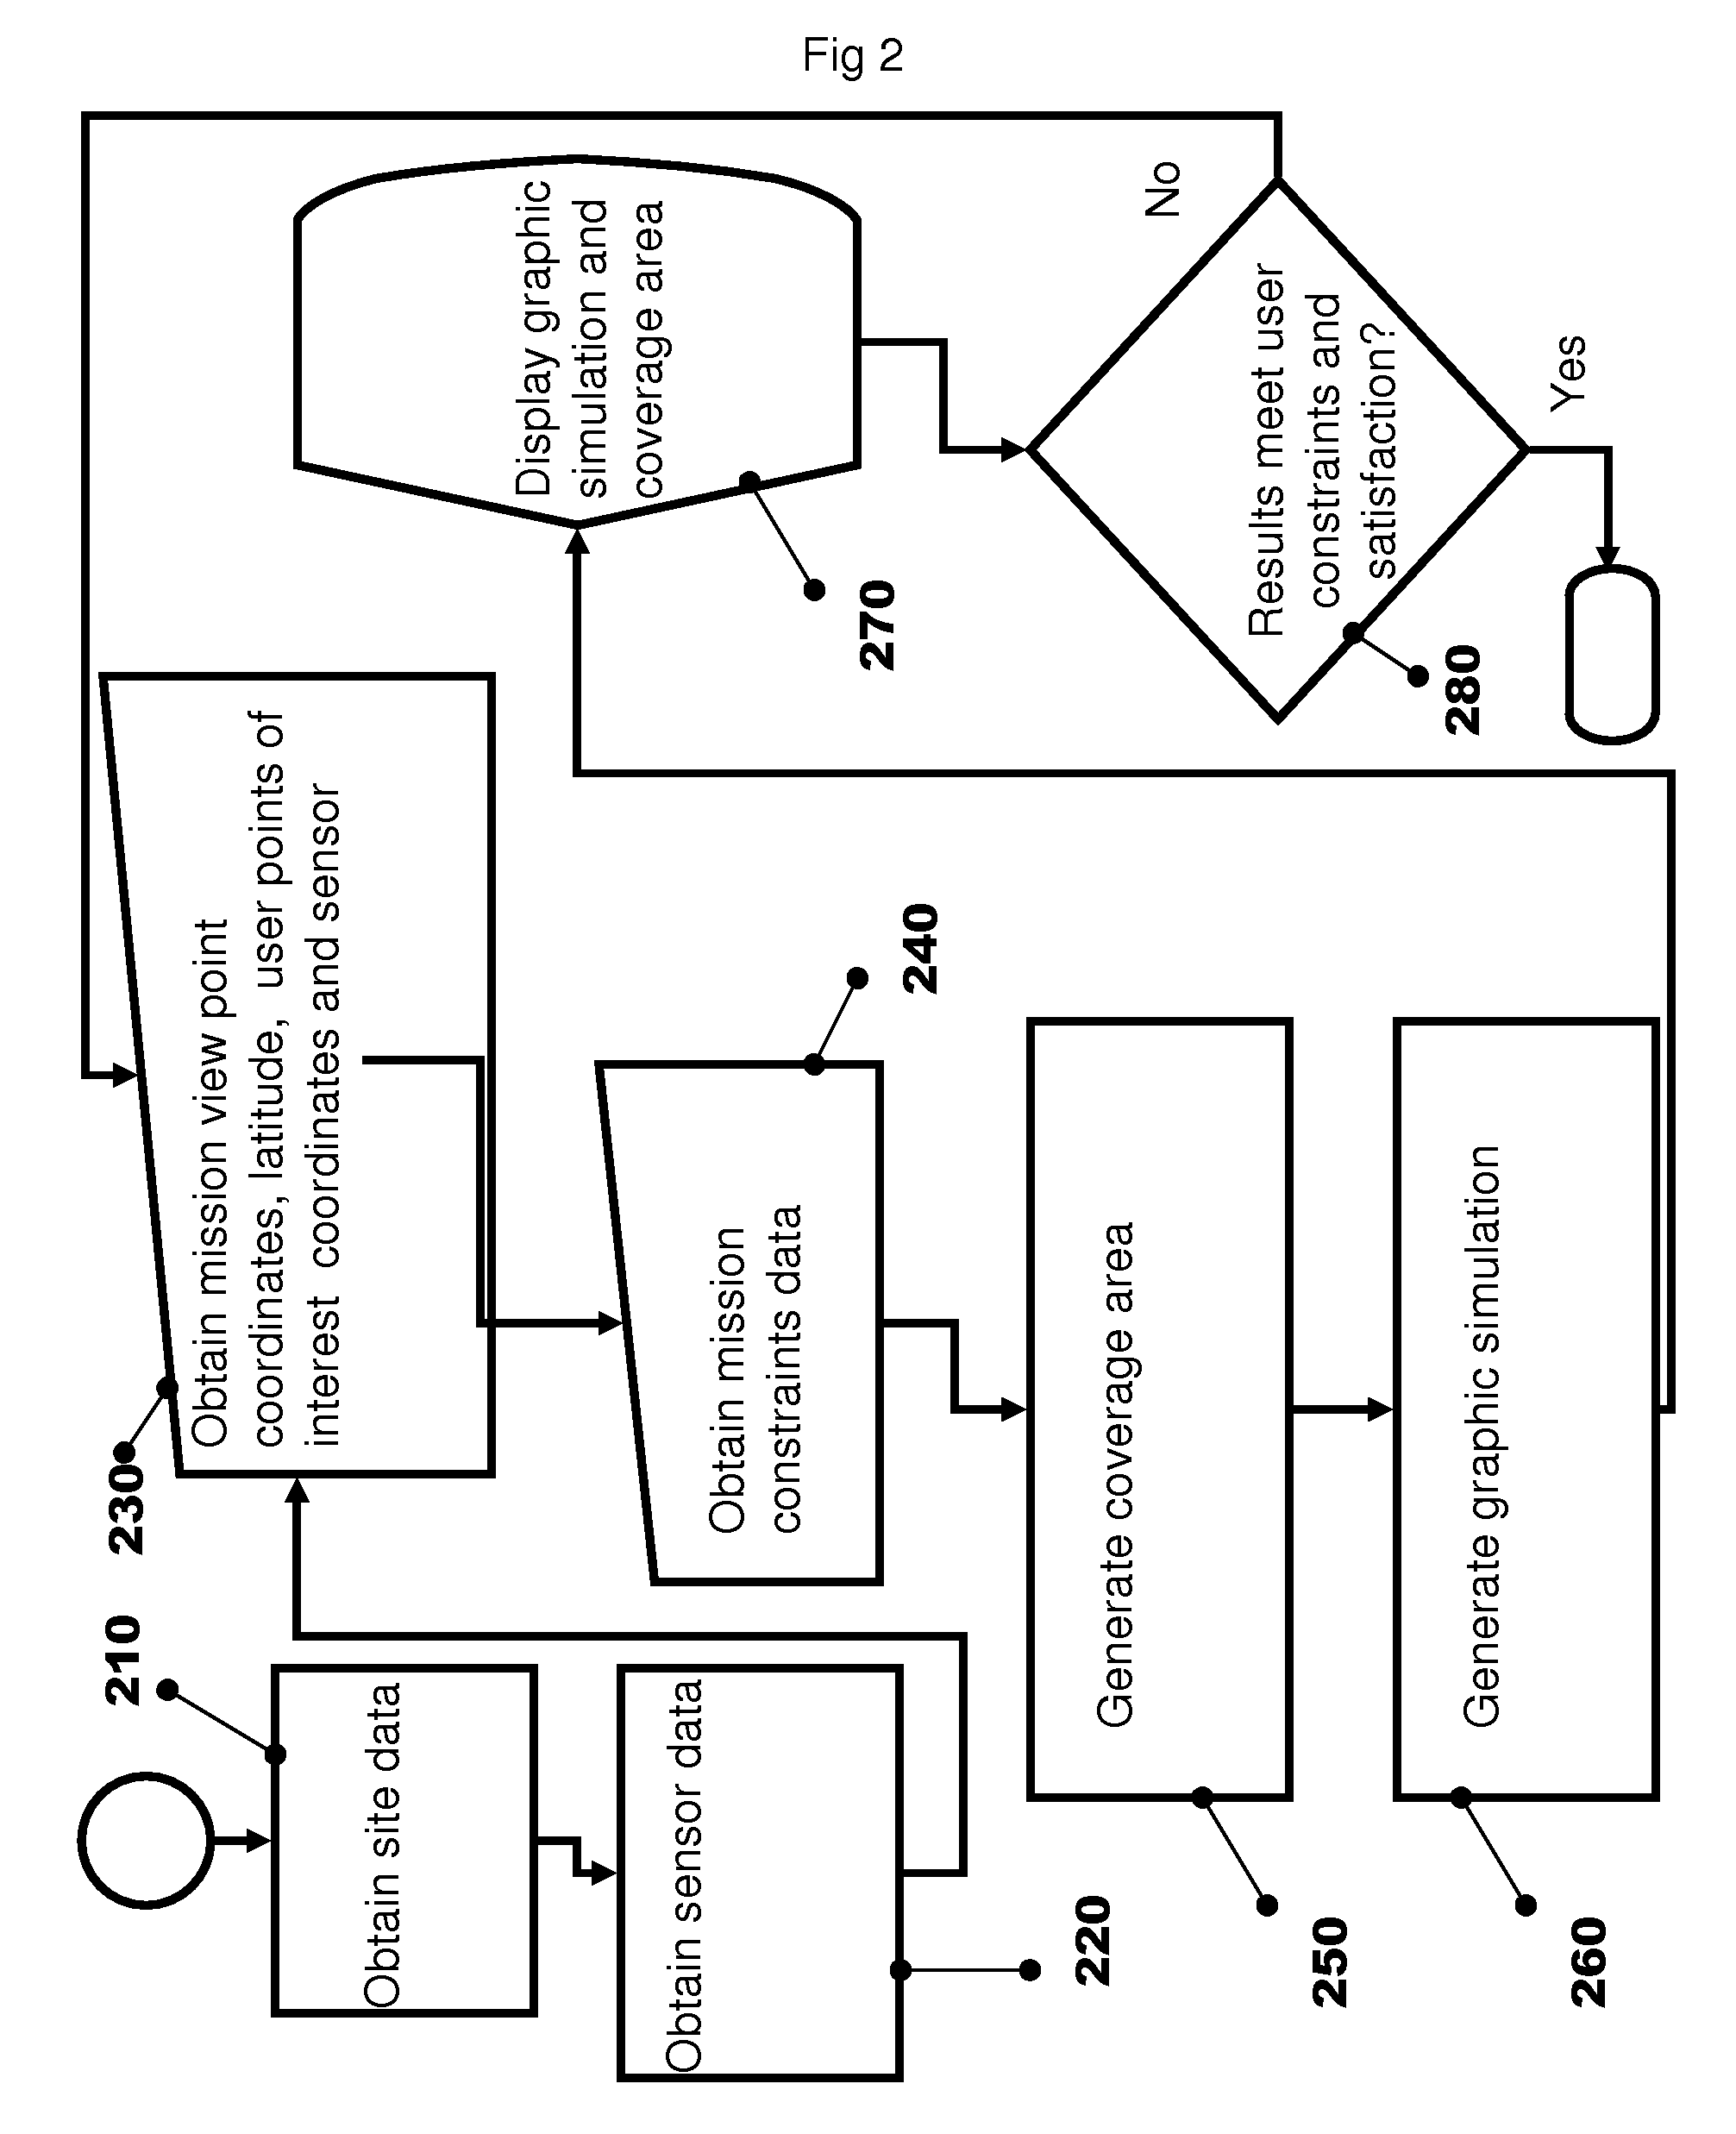 Method for planning a security array of sensor units